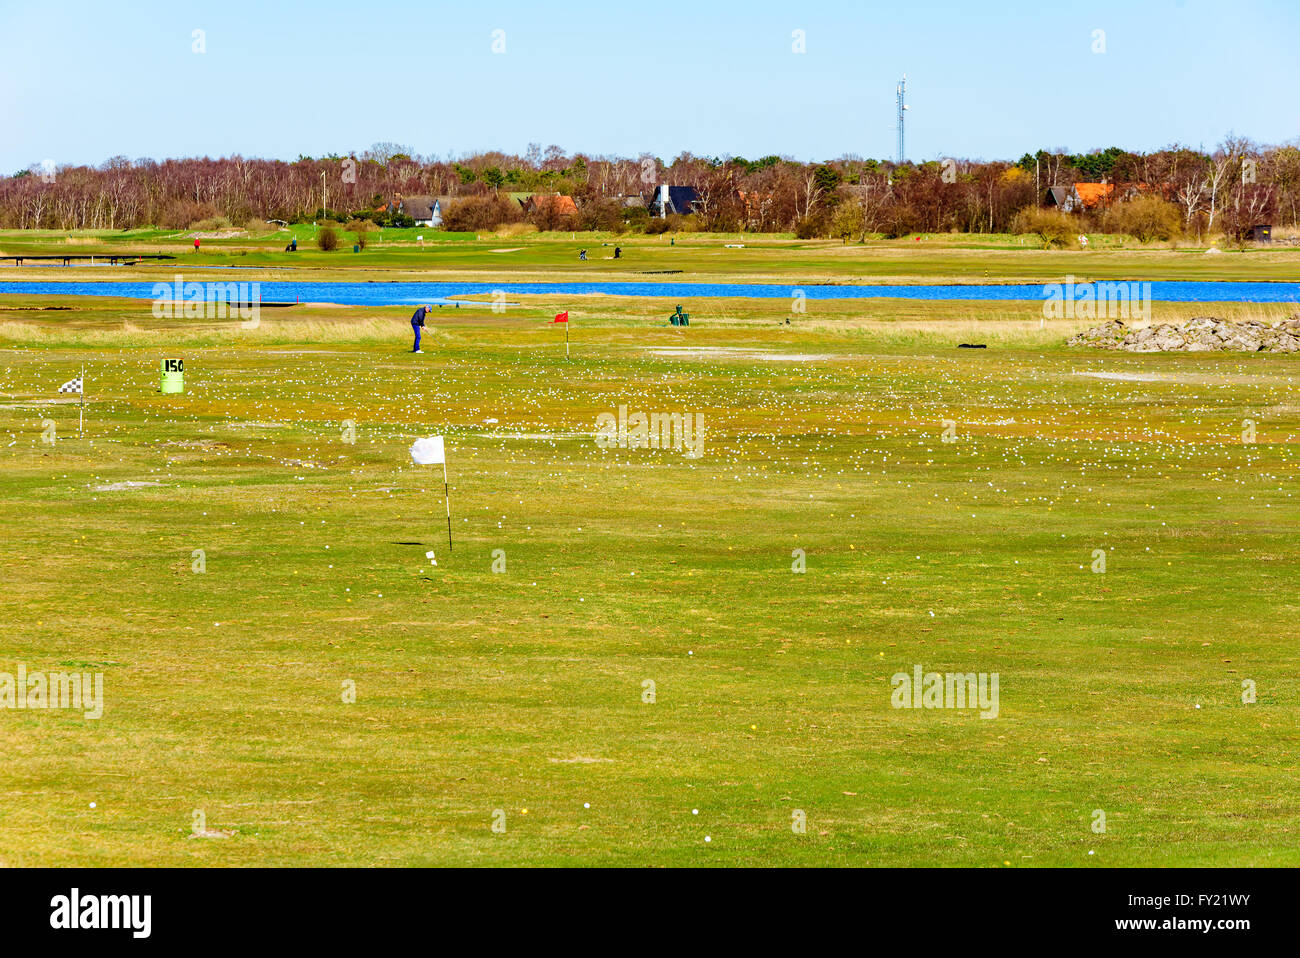 Falsterbo, Sweden - April 11, 2016: Driving range full of golf balls. A golfer is practicing his swing in the distance by the wa Stock Photo